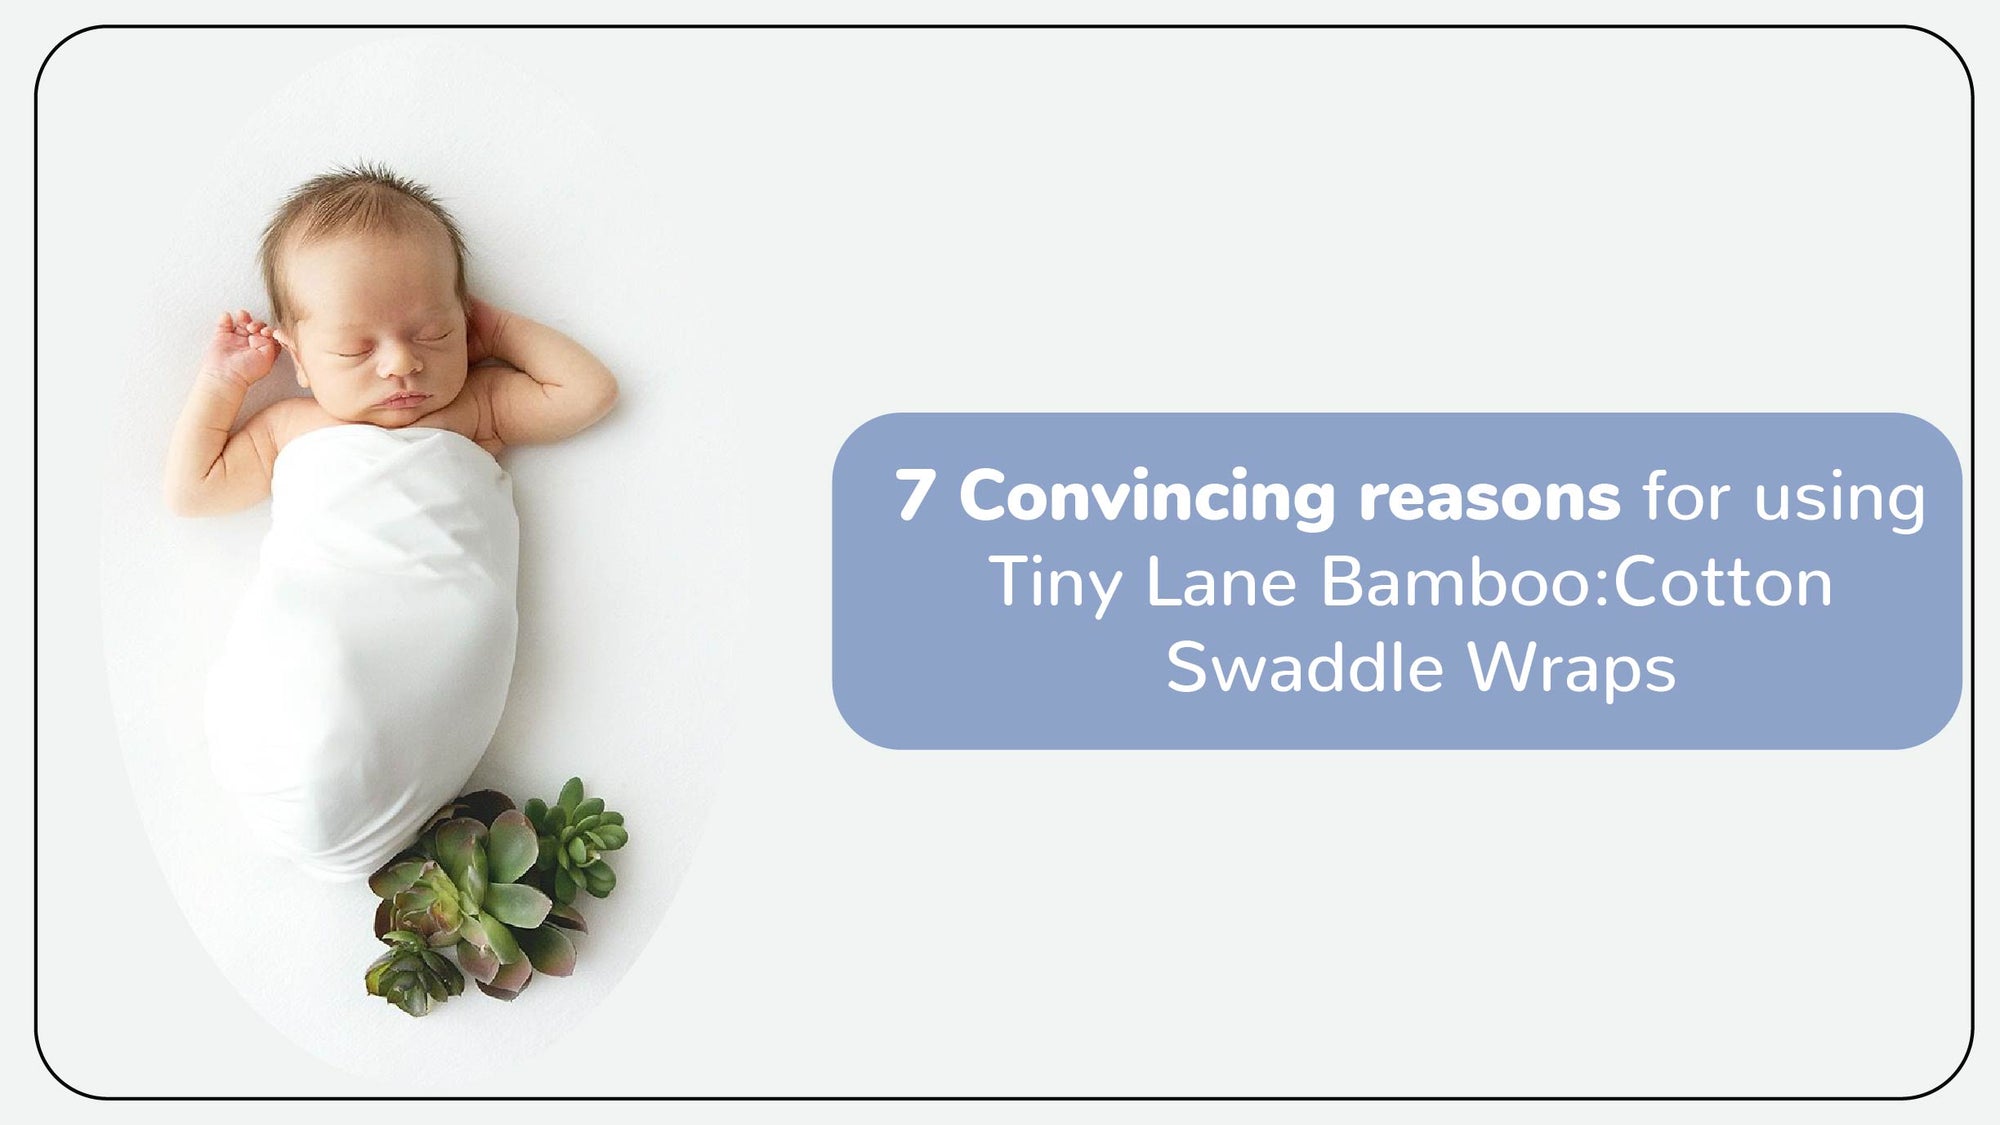 7 Convincing Reasons for Using Tiny Lane Bamboo:Cotton Swaddle Wraps.